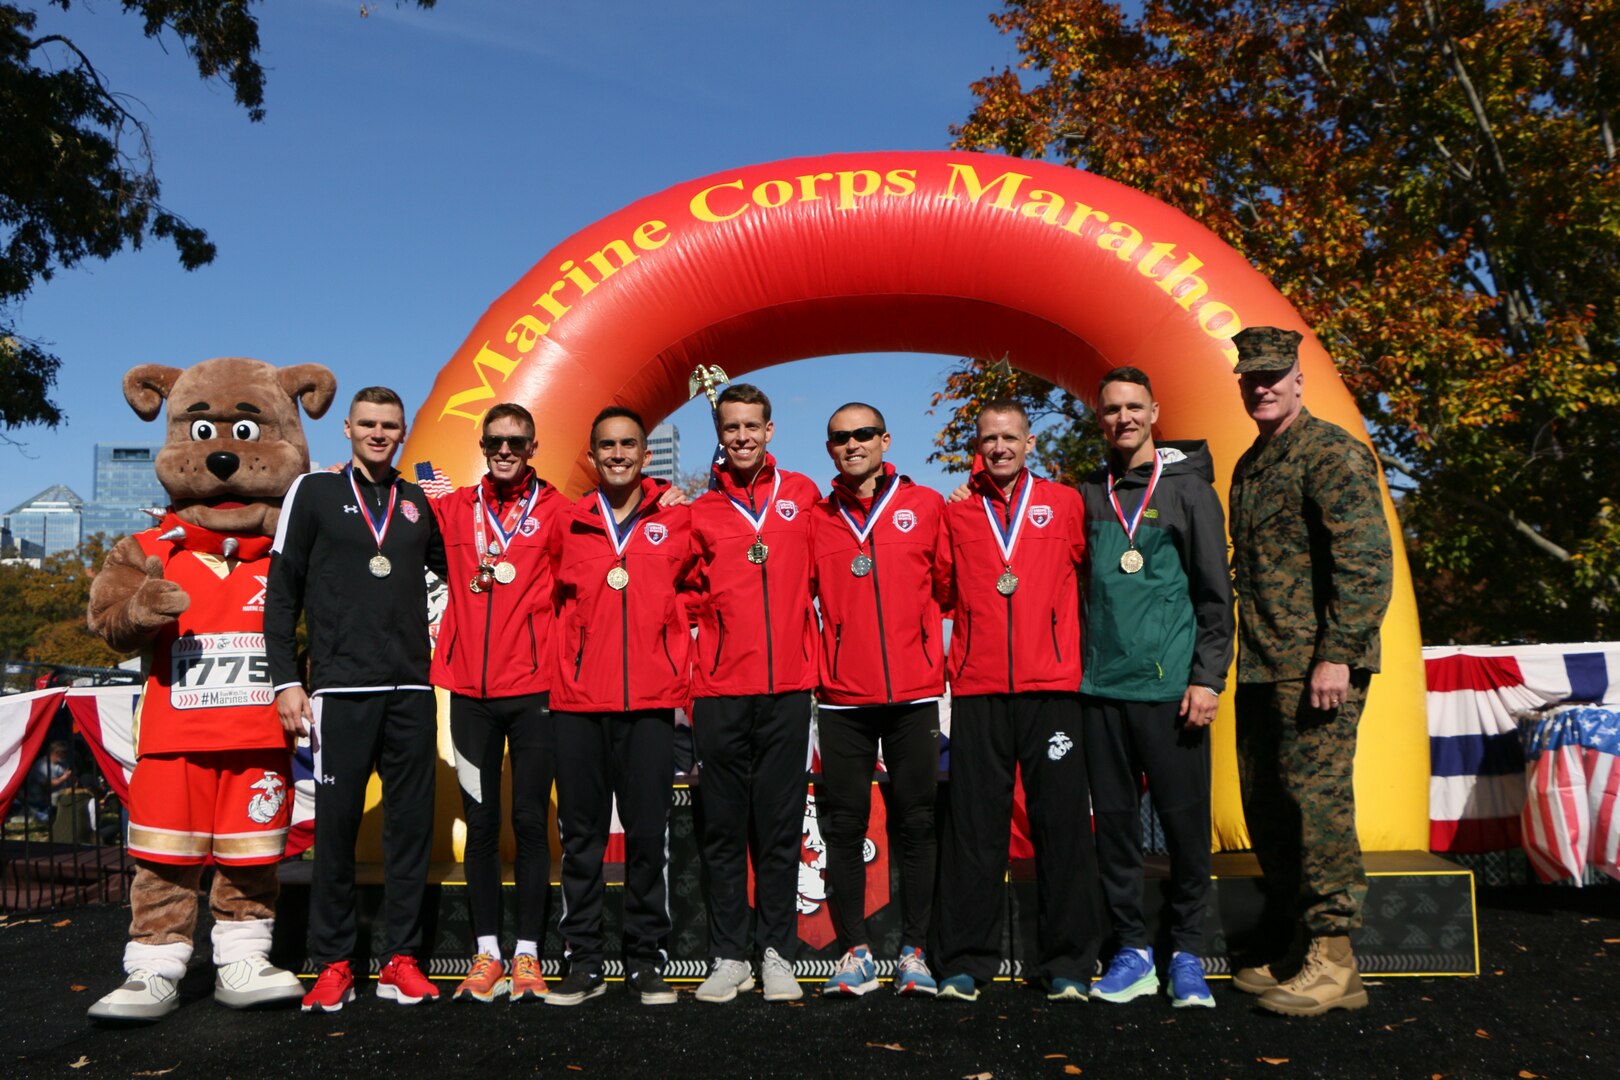 Marine Corps men capture their first Armed Forces gold during the 2022 Armed Forces Marathon Championship held in conjunction with the 47th Marine Corps Marathon in Washington, D.C.  The Armed Forces Championship features teams from the Marine Corps, Navy (with Coast Guard runners), and Air Force.  Department of Defense Photo by Mr. Steven Dinote - Released.